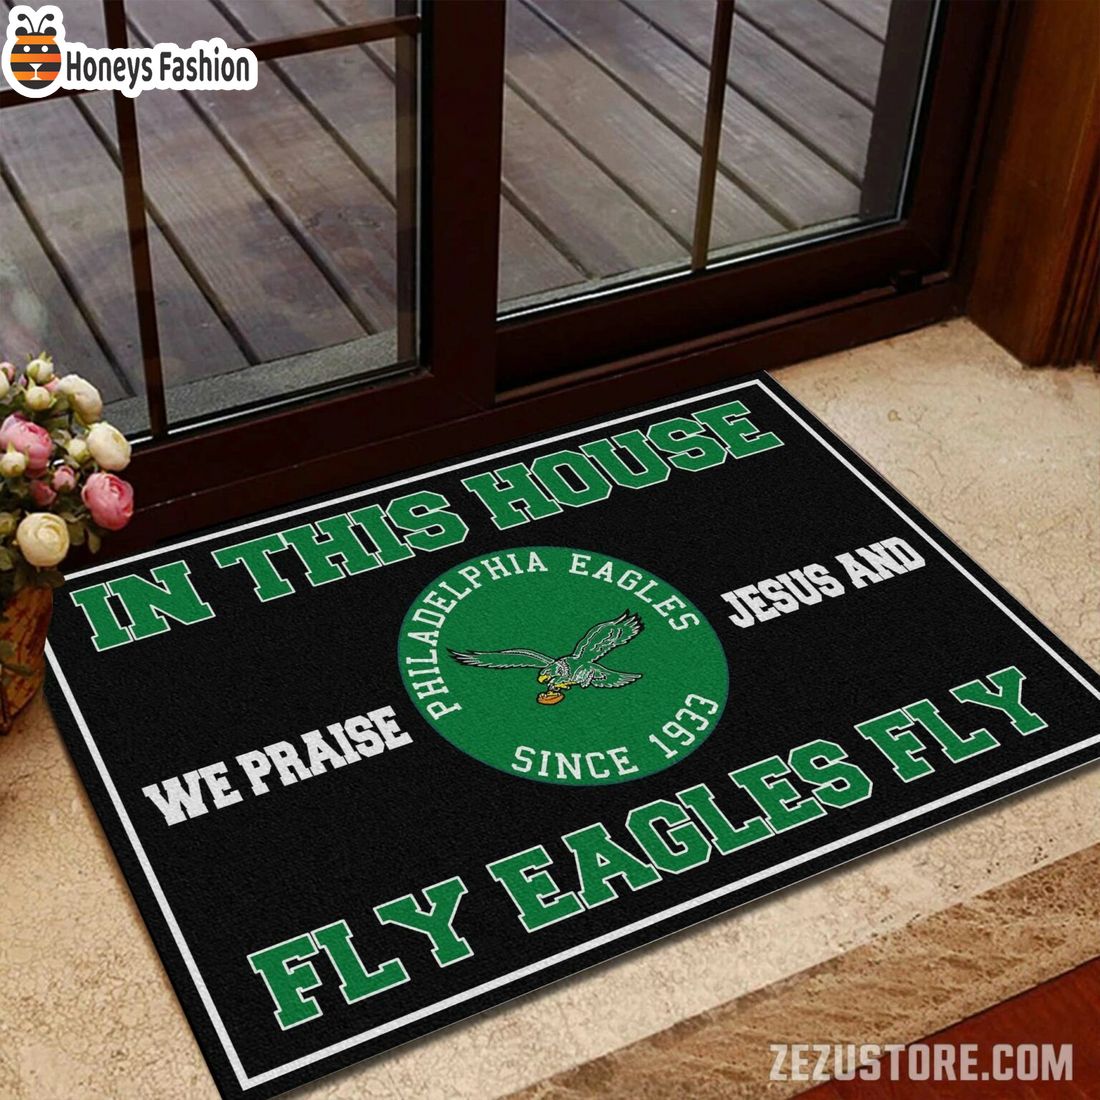 In this house we praise jesus and fly Eagles fly doormat